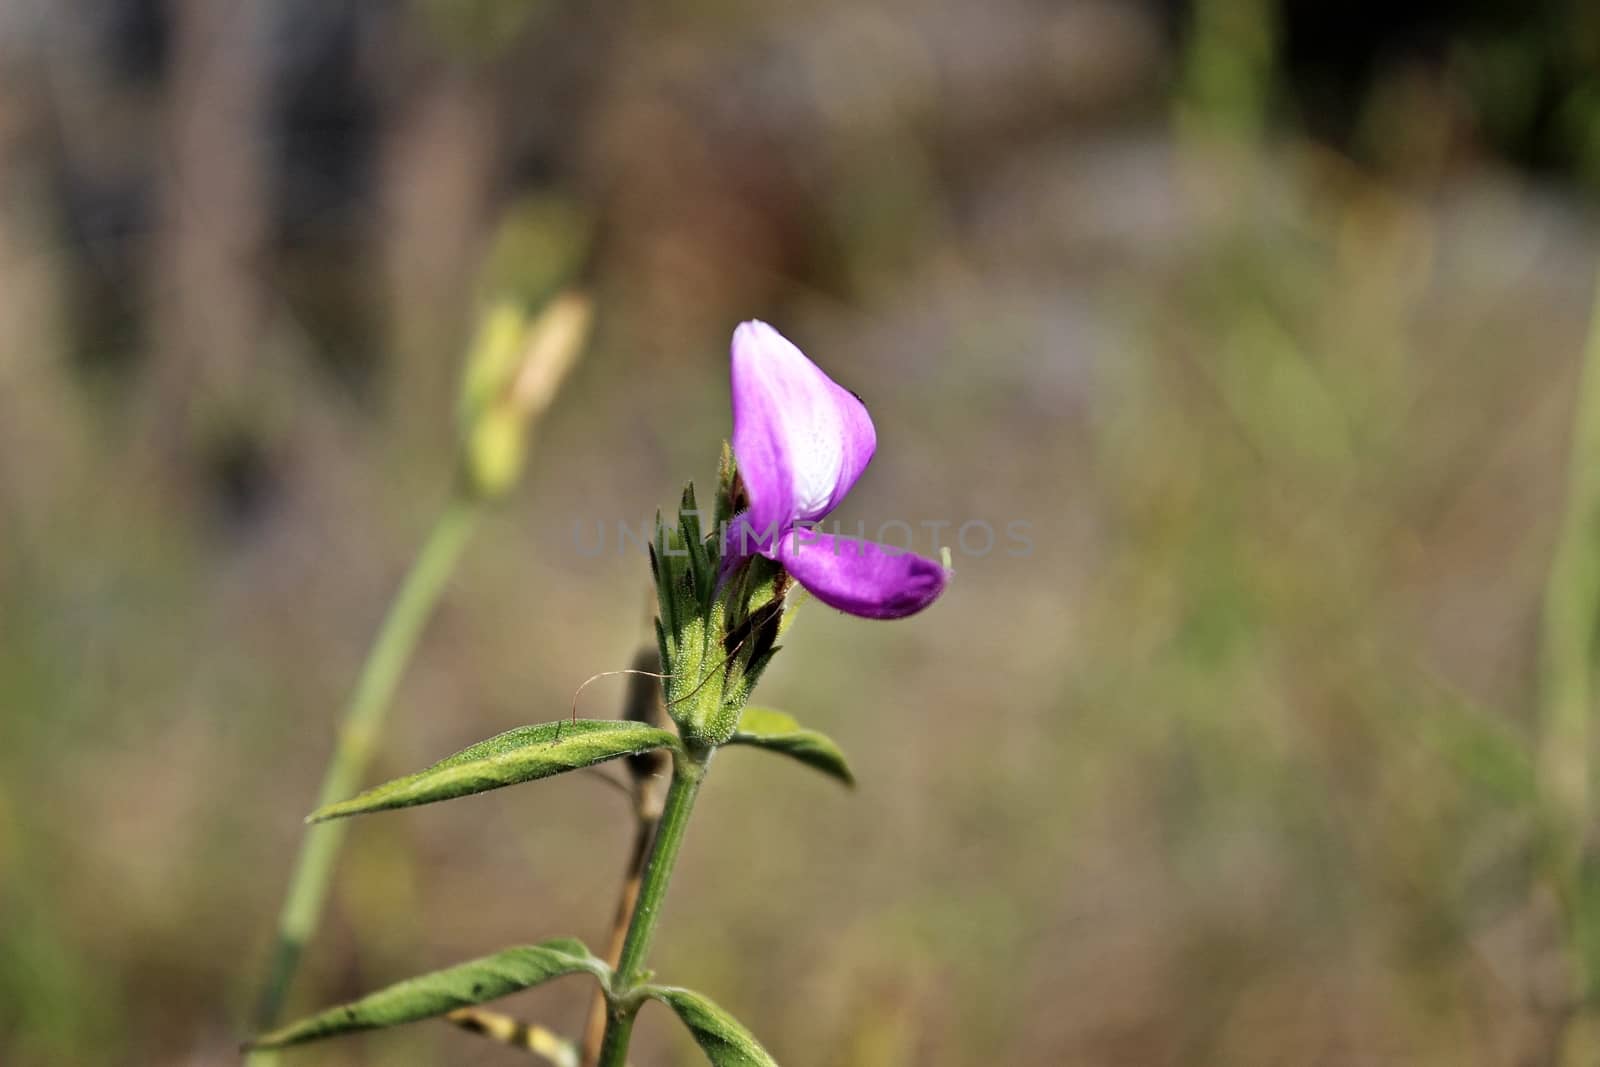 A pink purple flower is welcoming light from the sun in the ground.